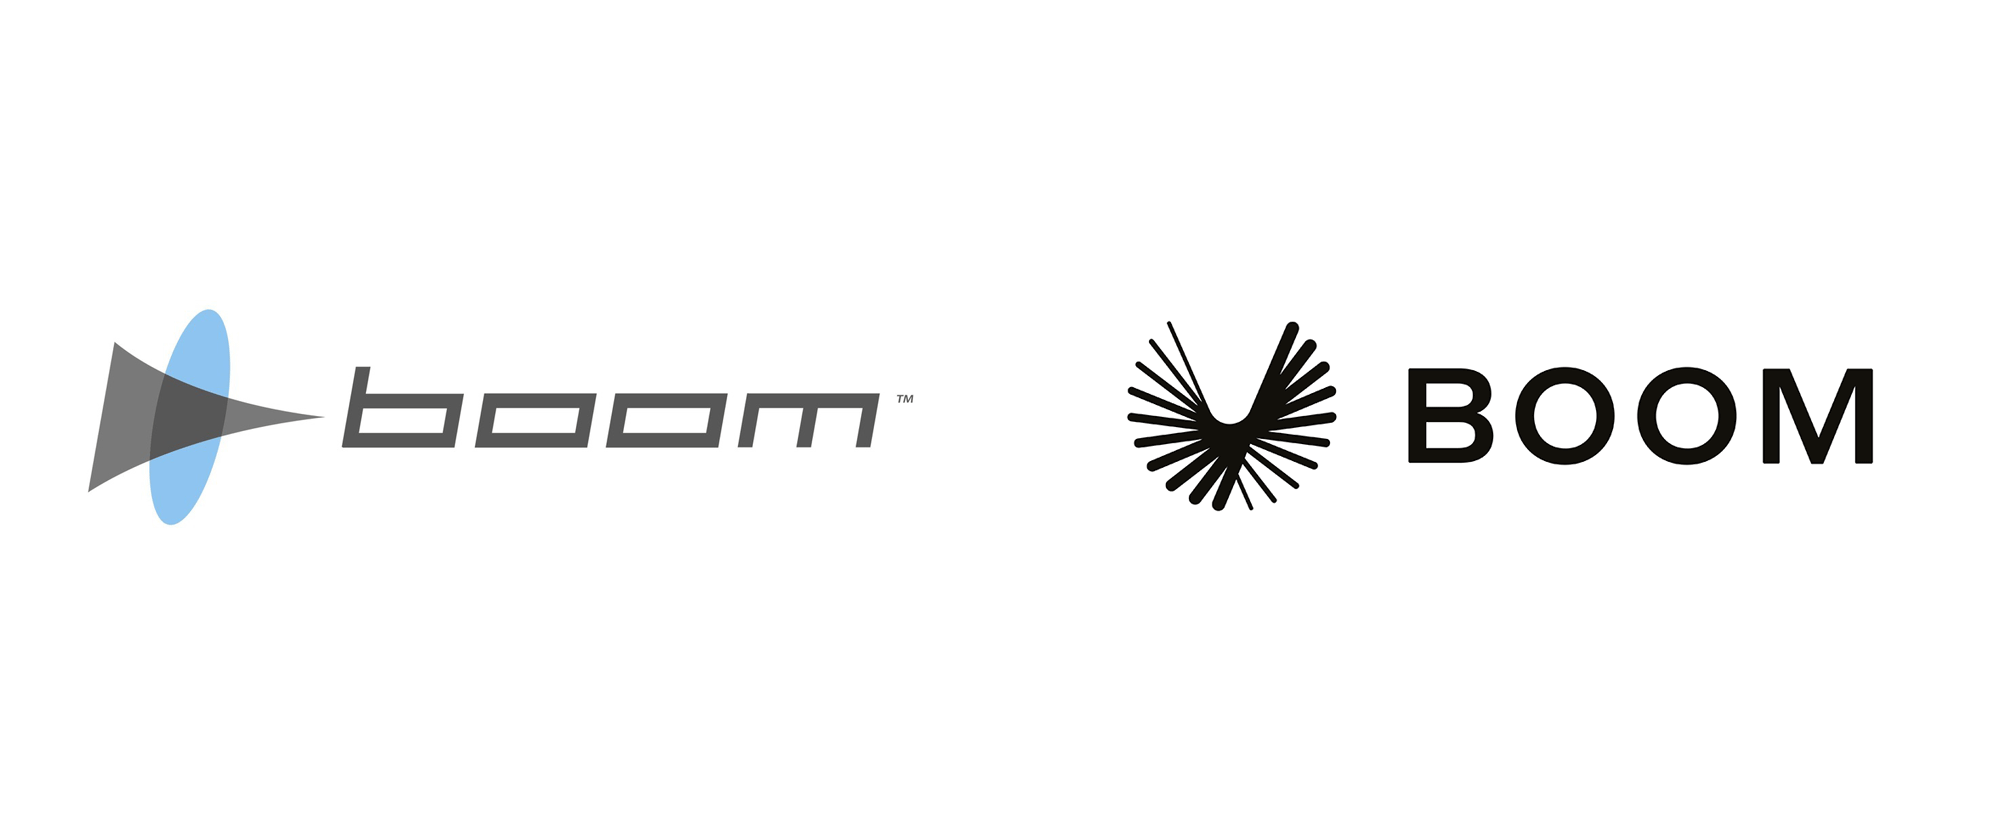 Ahead Logo - Brand New: New Logo and Identity for Boom by Manual